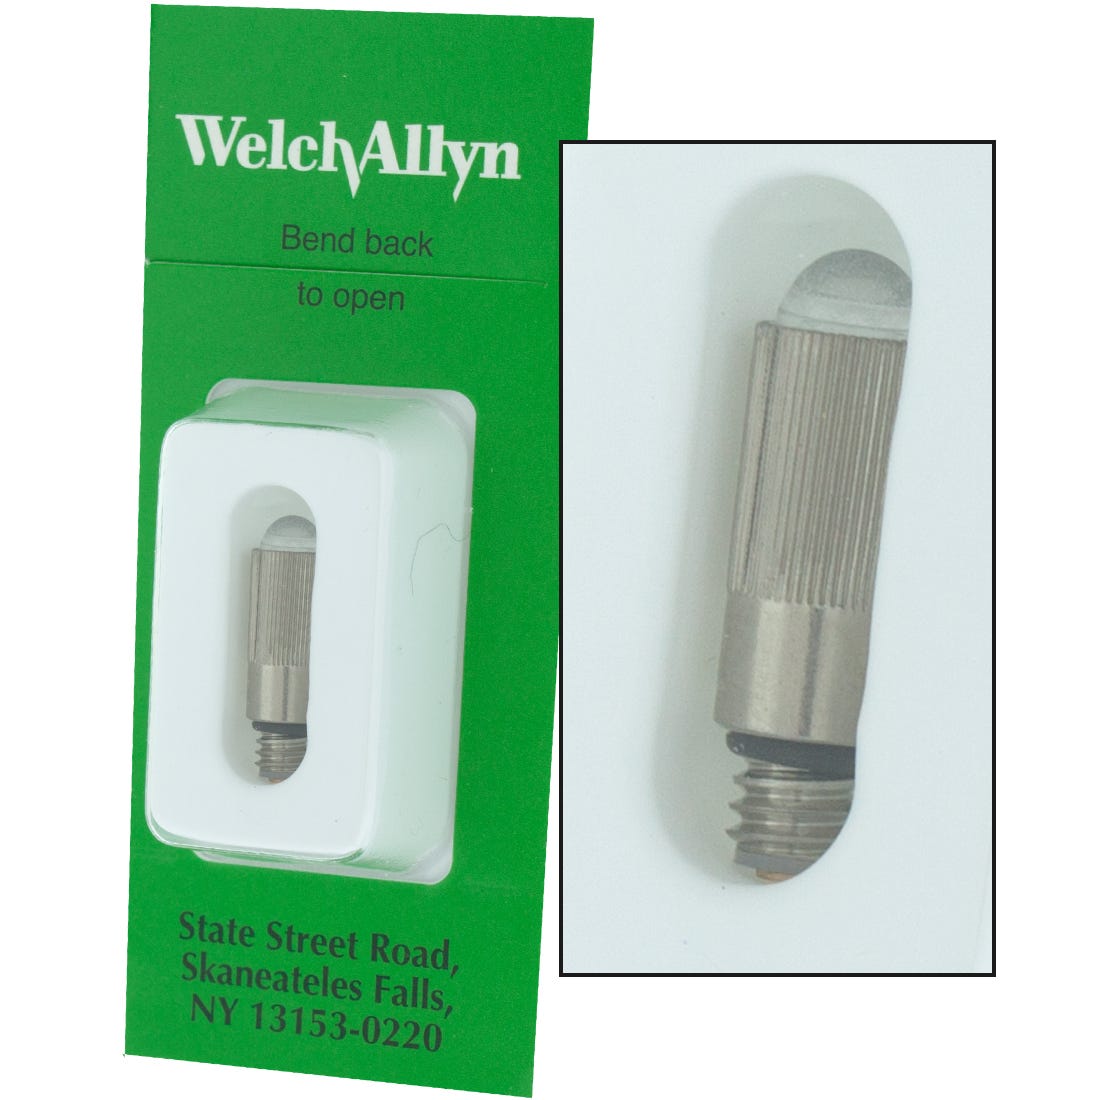 Welch Allyn Replacement Lamps - Large, Fits blade size 3 & 4, Miller sz 2